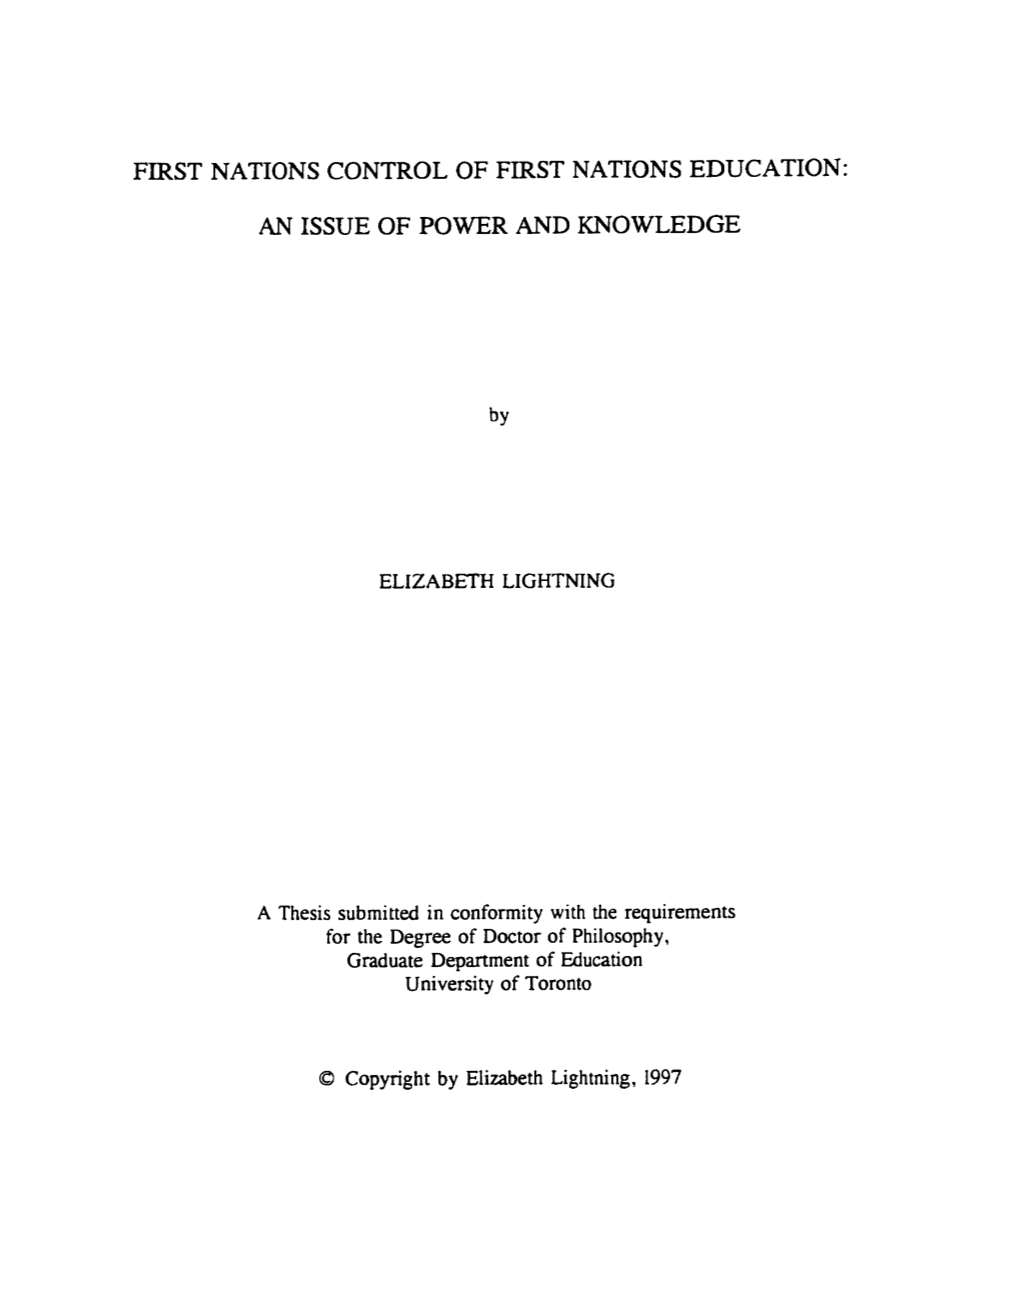 First Nations Control of First Nations Education